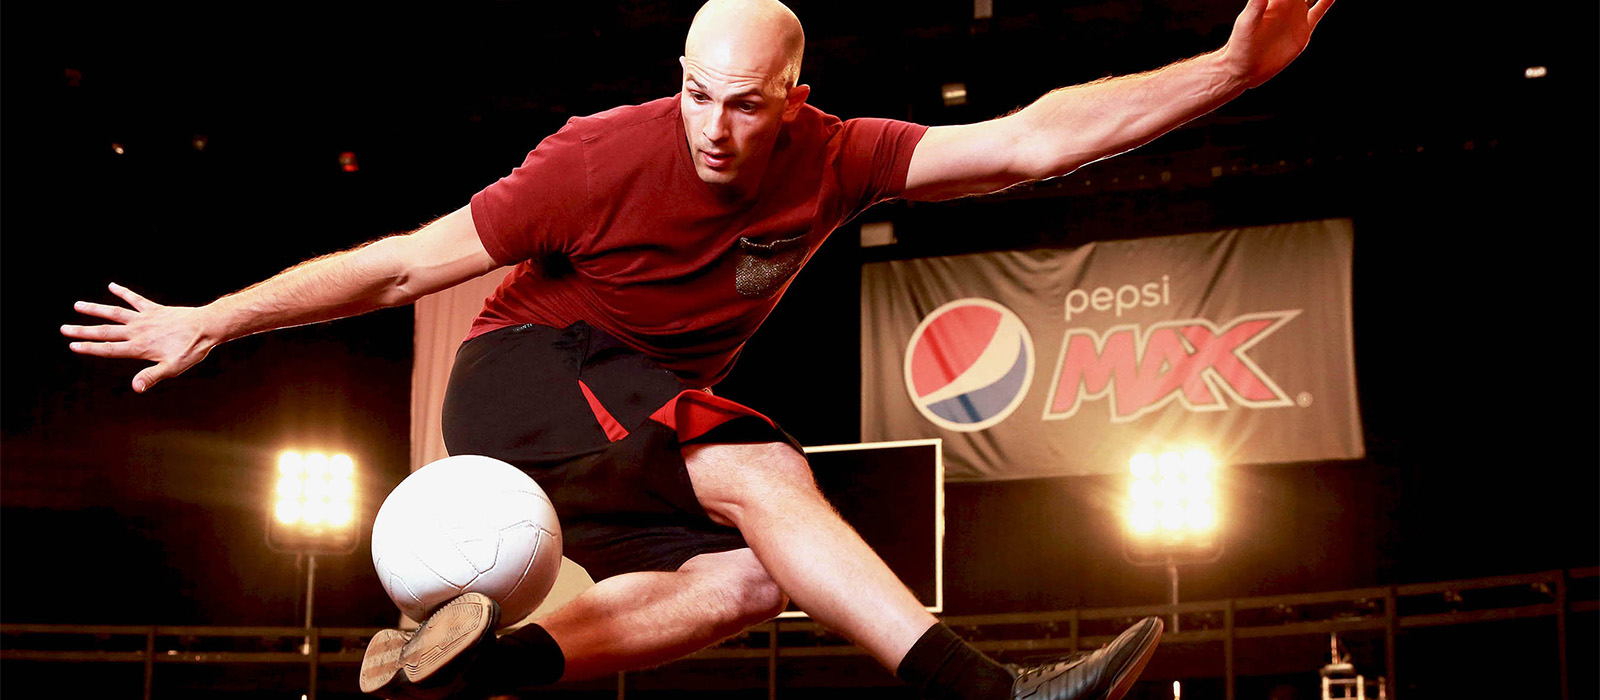 EDITORIAL USE ONLY Daniel Cutting, Professional Football Freestyler and FIVE-TIME Guinness World Record Holder, performs at the launch of the Pepsi MAX Volley Arena in Essex. PRESS ASSOCIATION Photo. Picture date: Thursday April 21, 2016. Photo credit should read: Matt Alexander/PA Wire